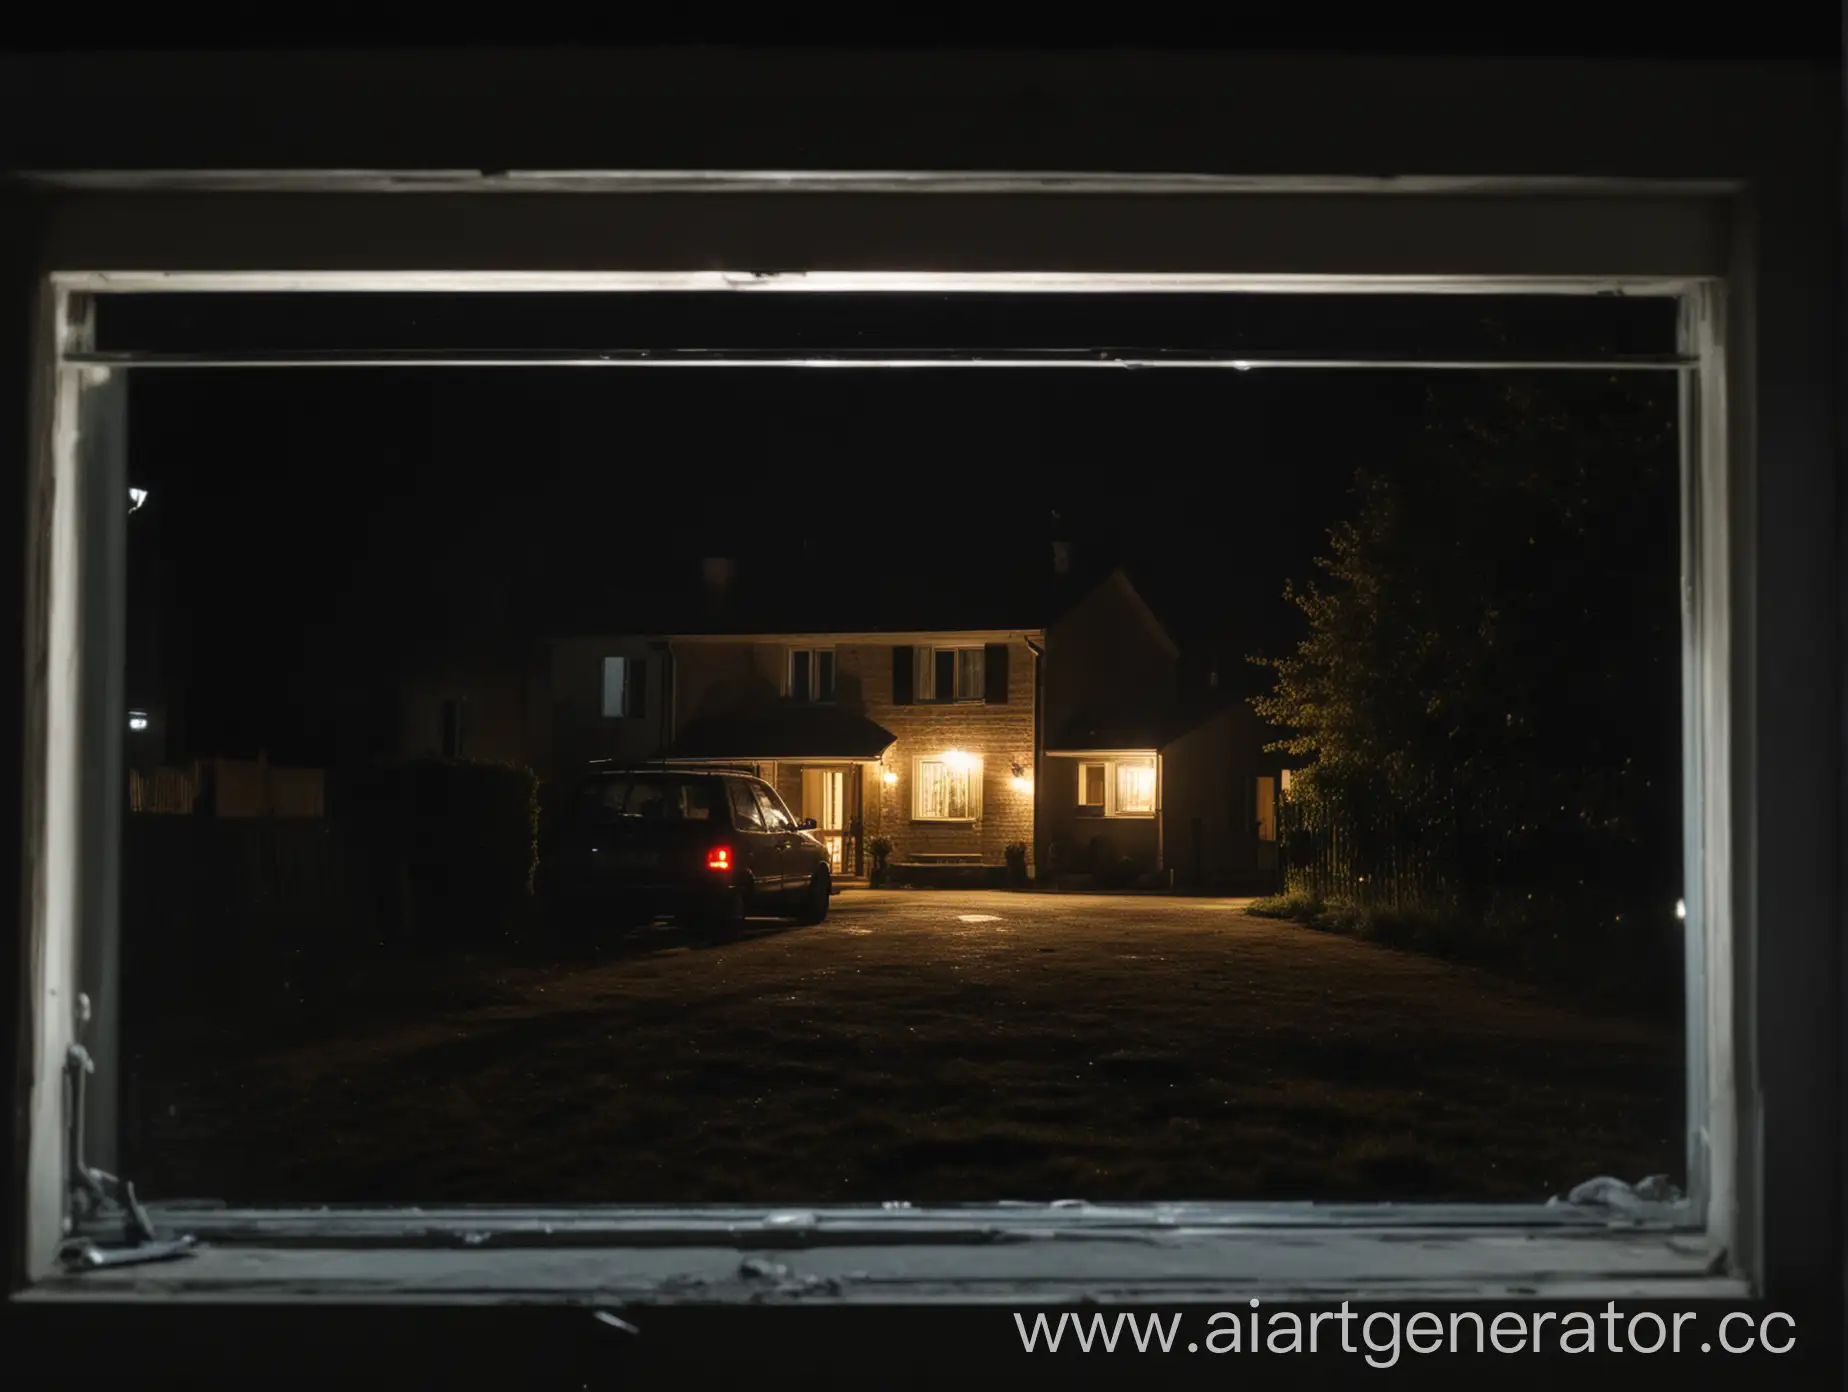 Nighttime-Scene-Car-Approaching-House-with-Glowing-Headlights